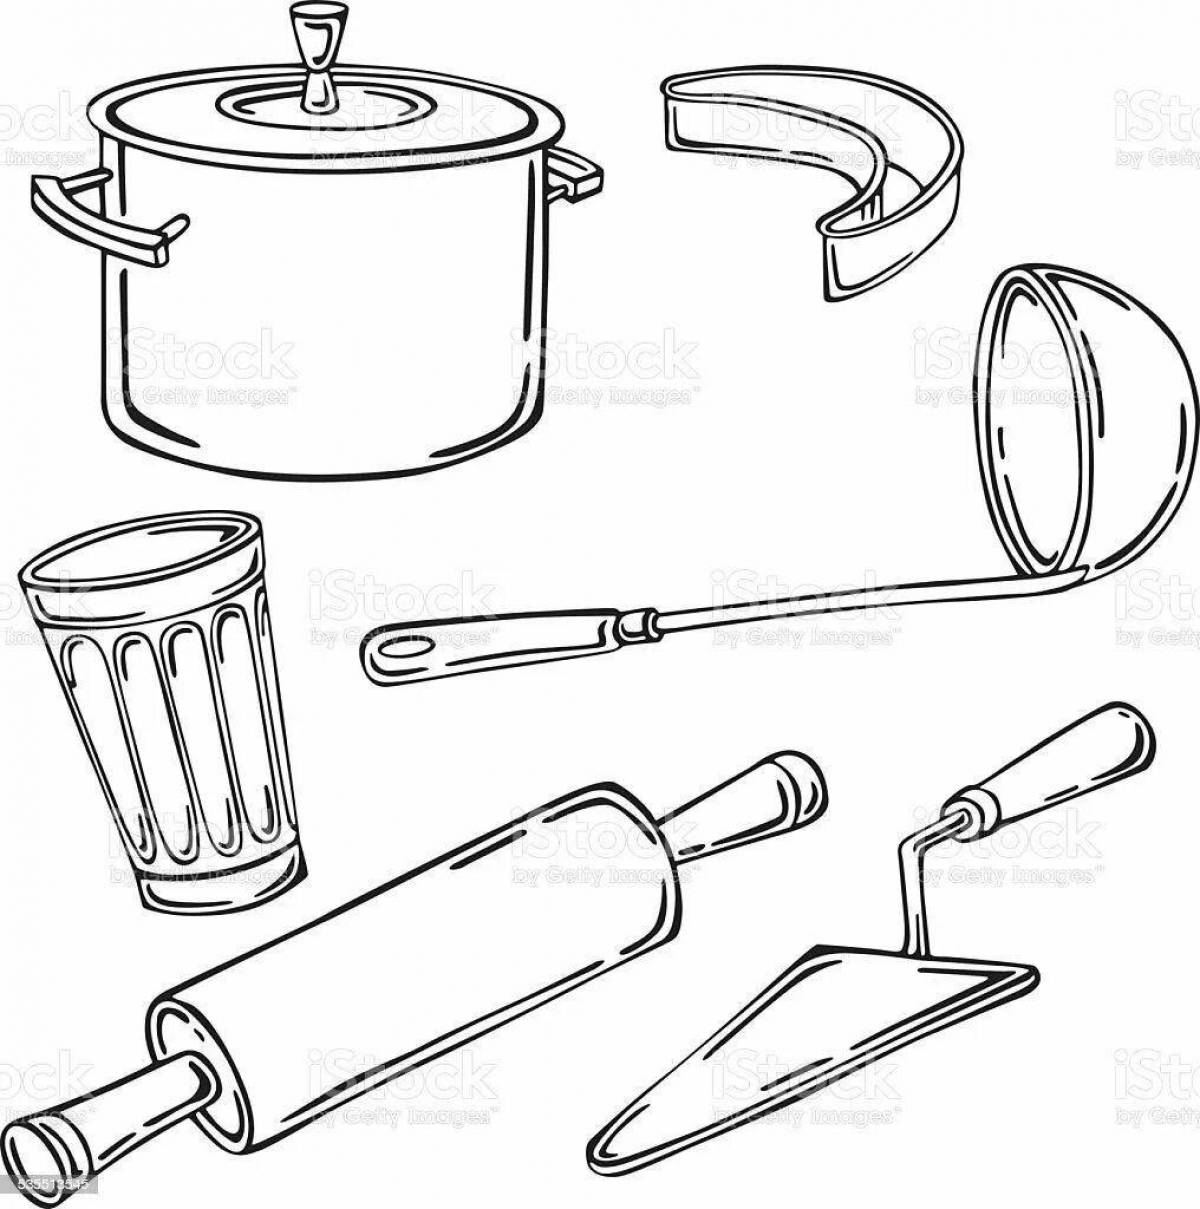 Playful baby kitchen utensils coloring page